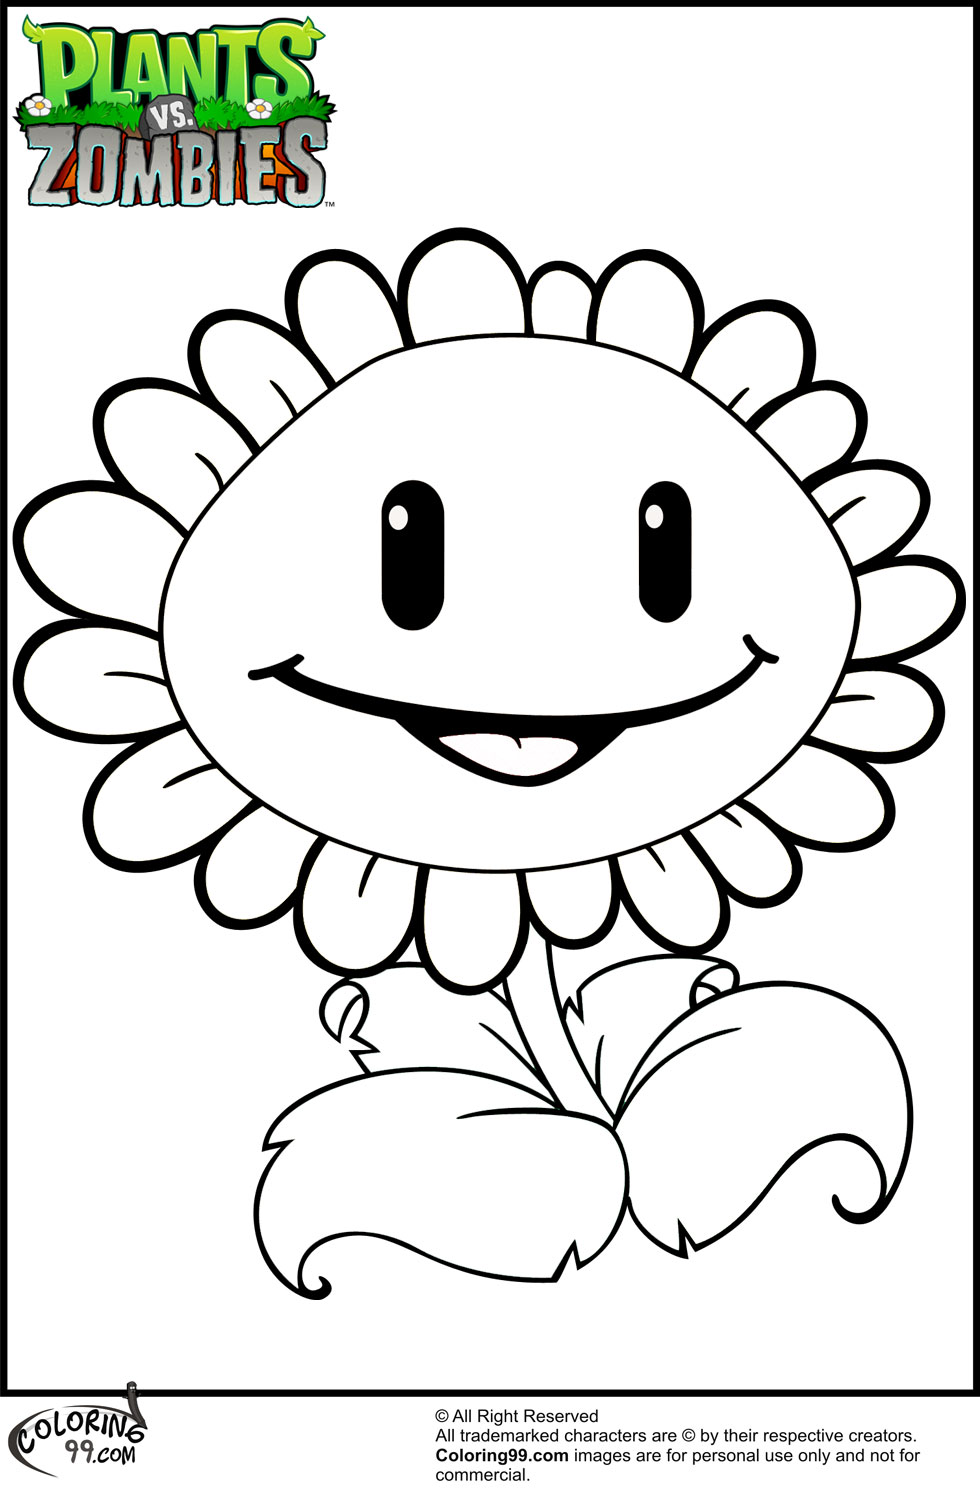 Plants VS Zombies Coloring Pages | Minister Coloring